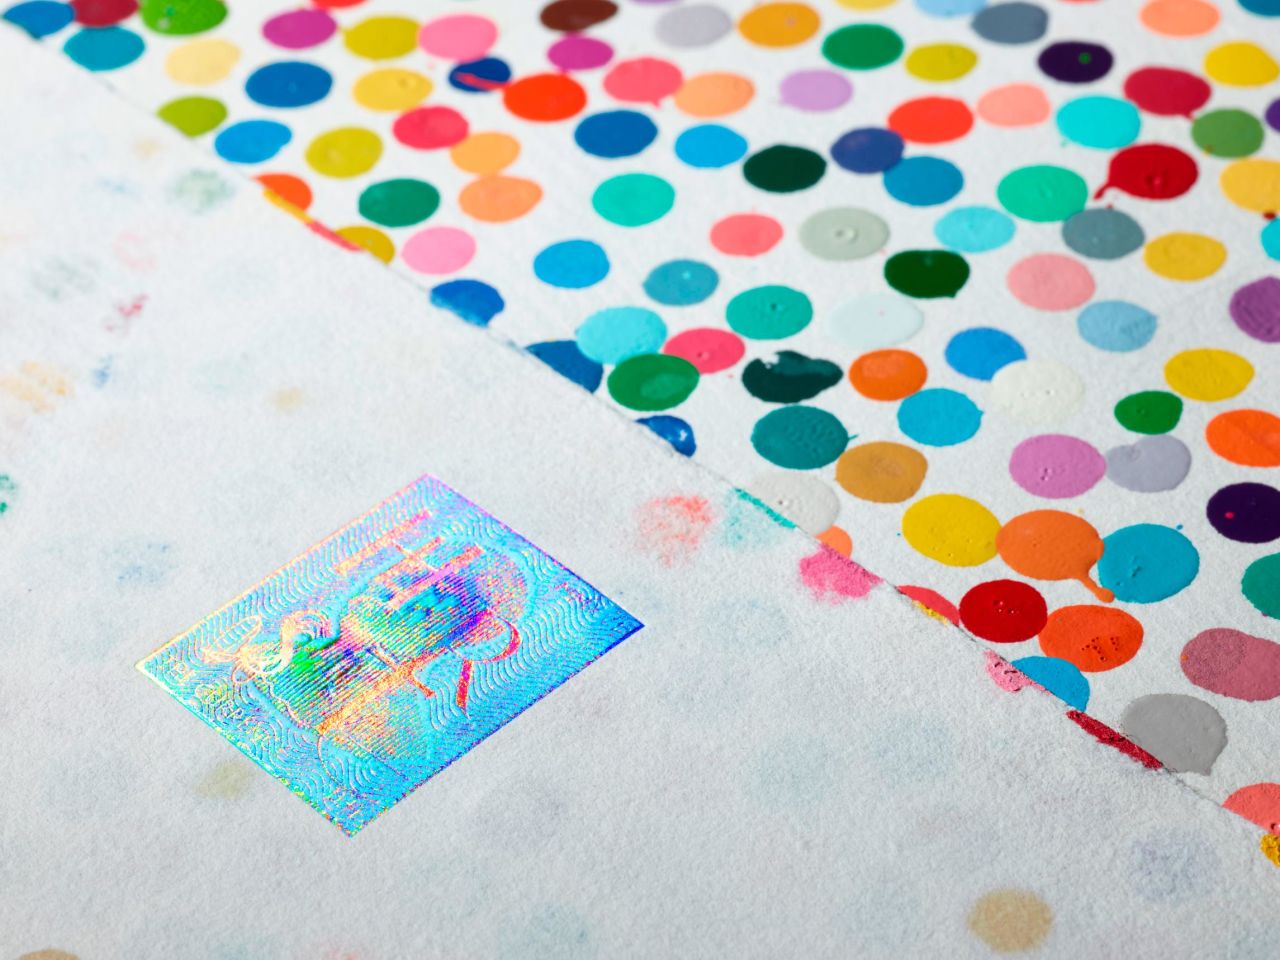 Last year, Hirst issued NFTs for 10,000 of his signature "spot" paintings.